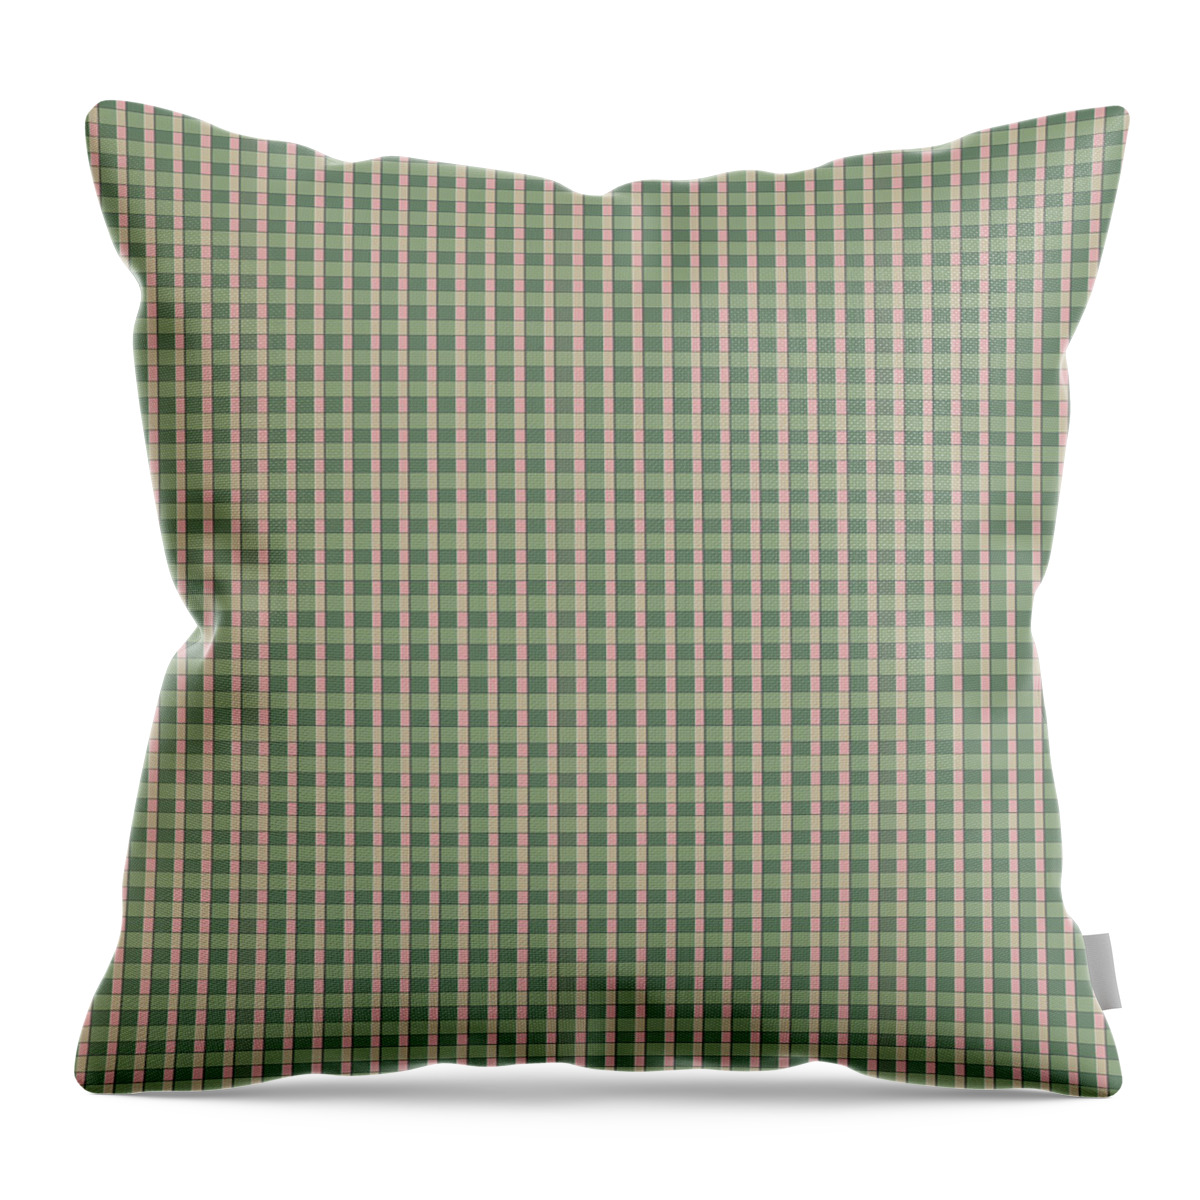 Green Throw Pillow featuring the digital art Sage and Pink Checkerboard by Lisa Blake